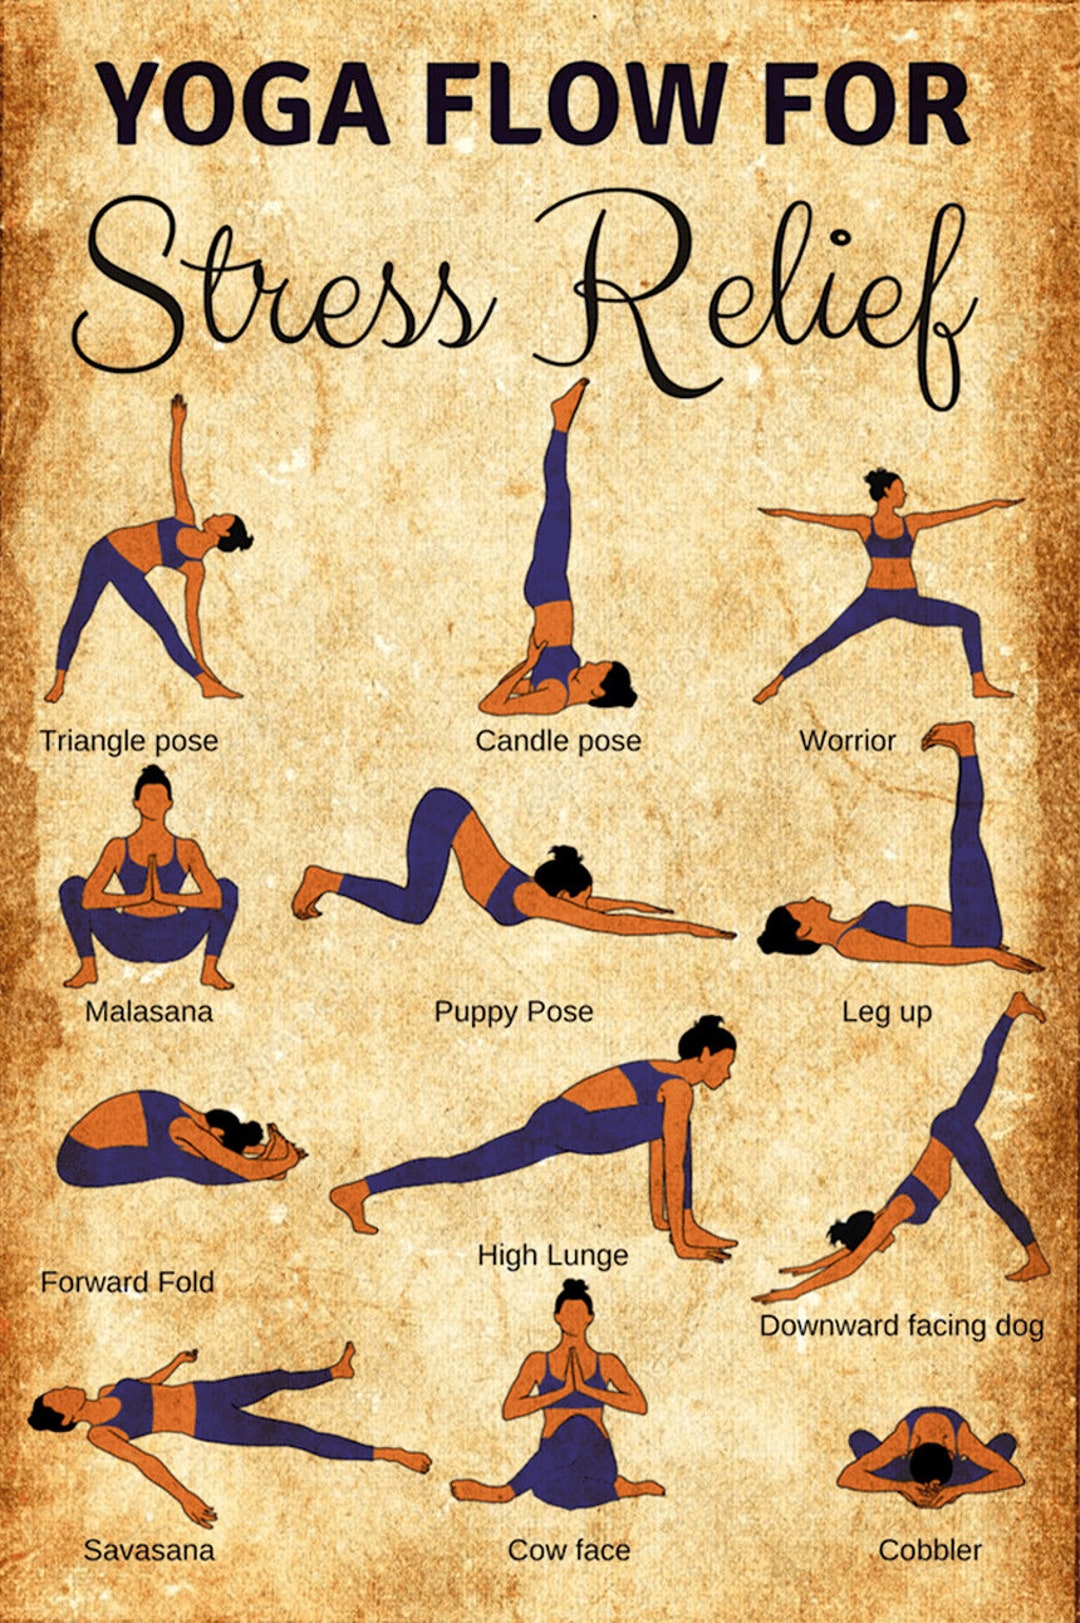 Yoga Lover Yoga Poses Yoga Flow for Stress Relief Poster Wall Decor Art  Print 